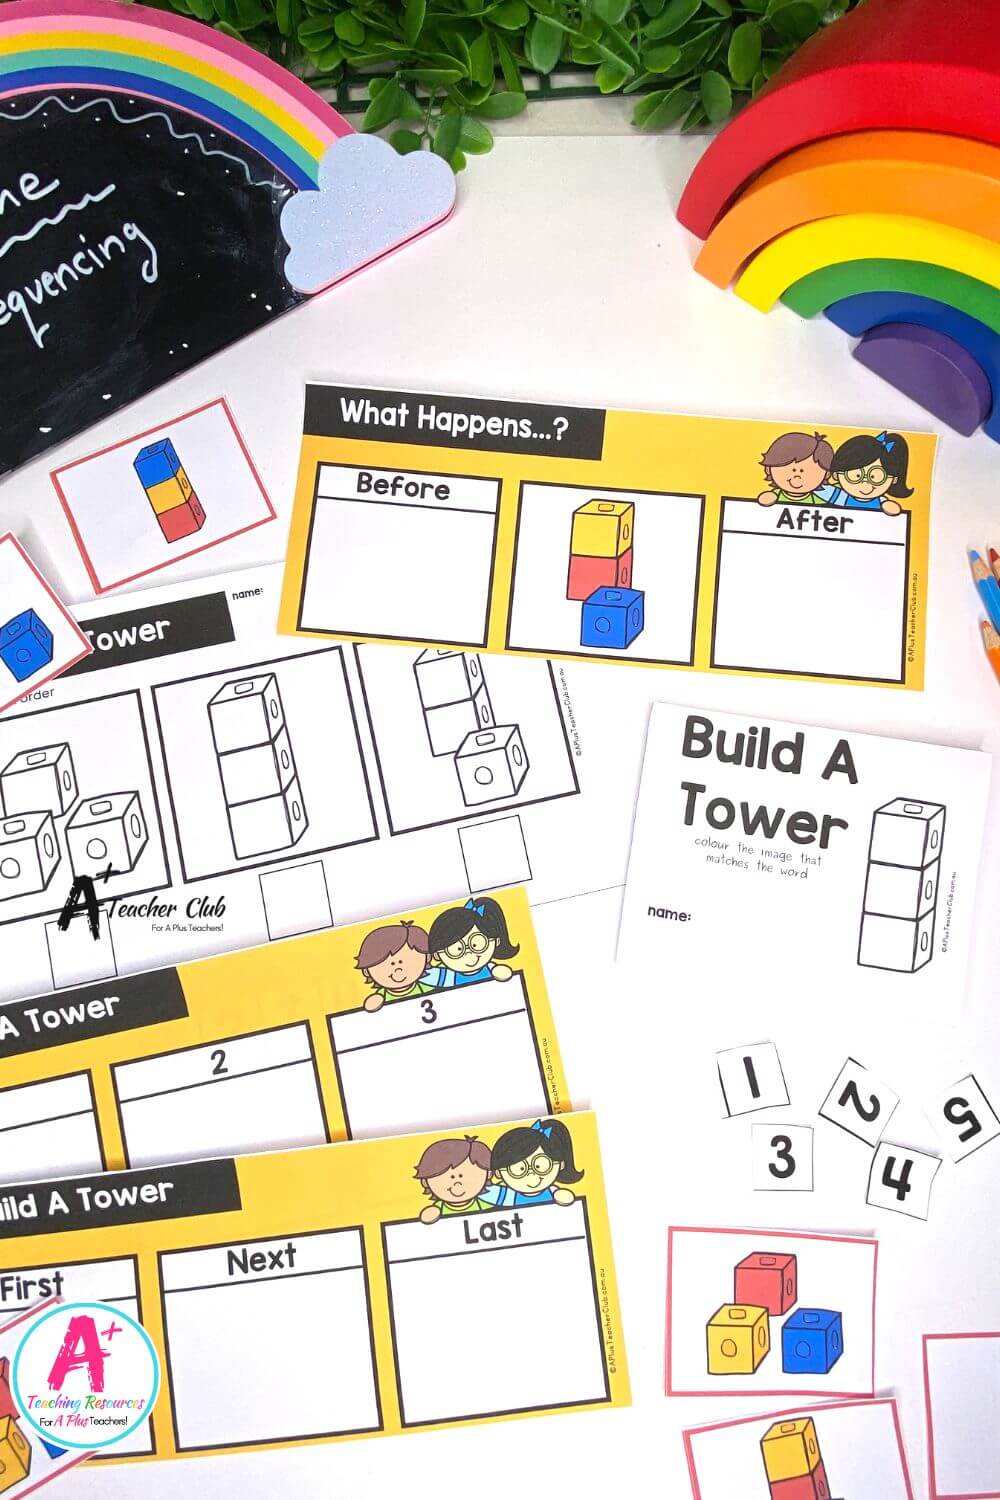 3-Step Sequencing Everyday Events - Build A Tower Activities Pack